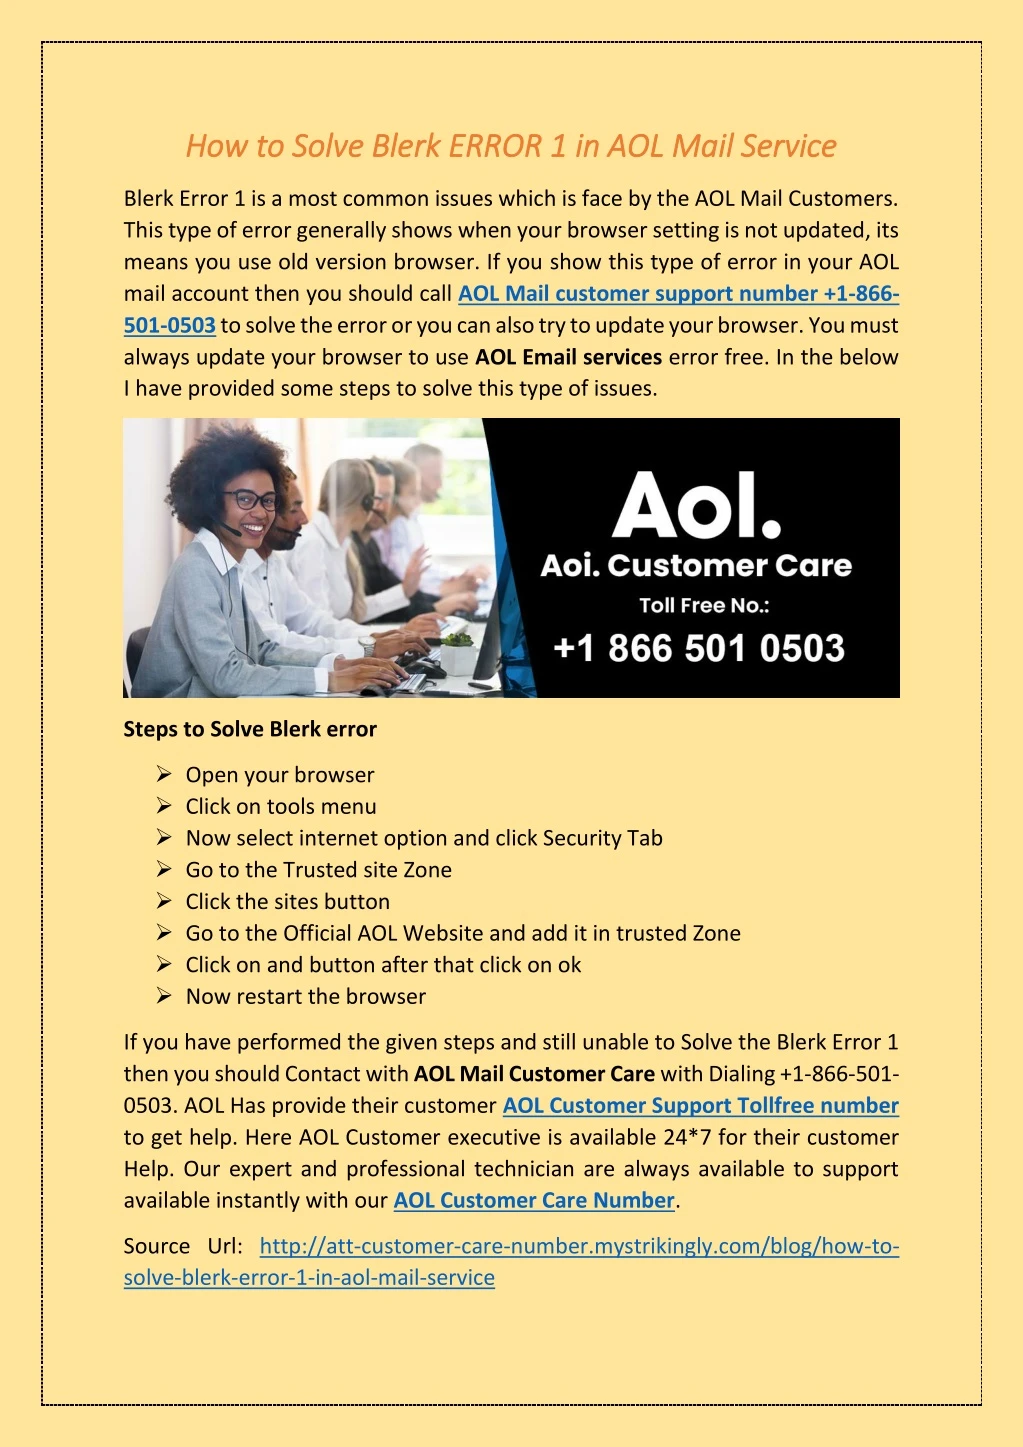 how to solve blerk error 1 in aol mail service